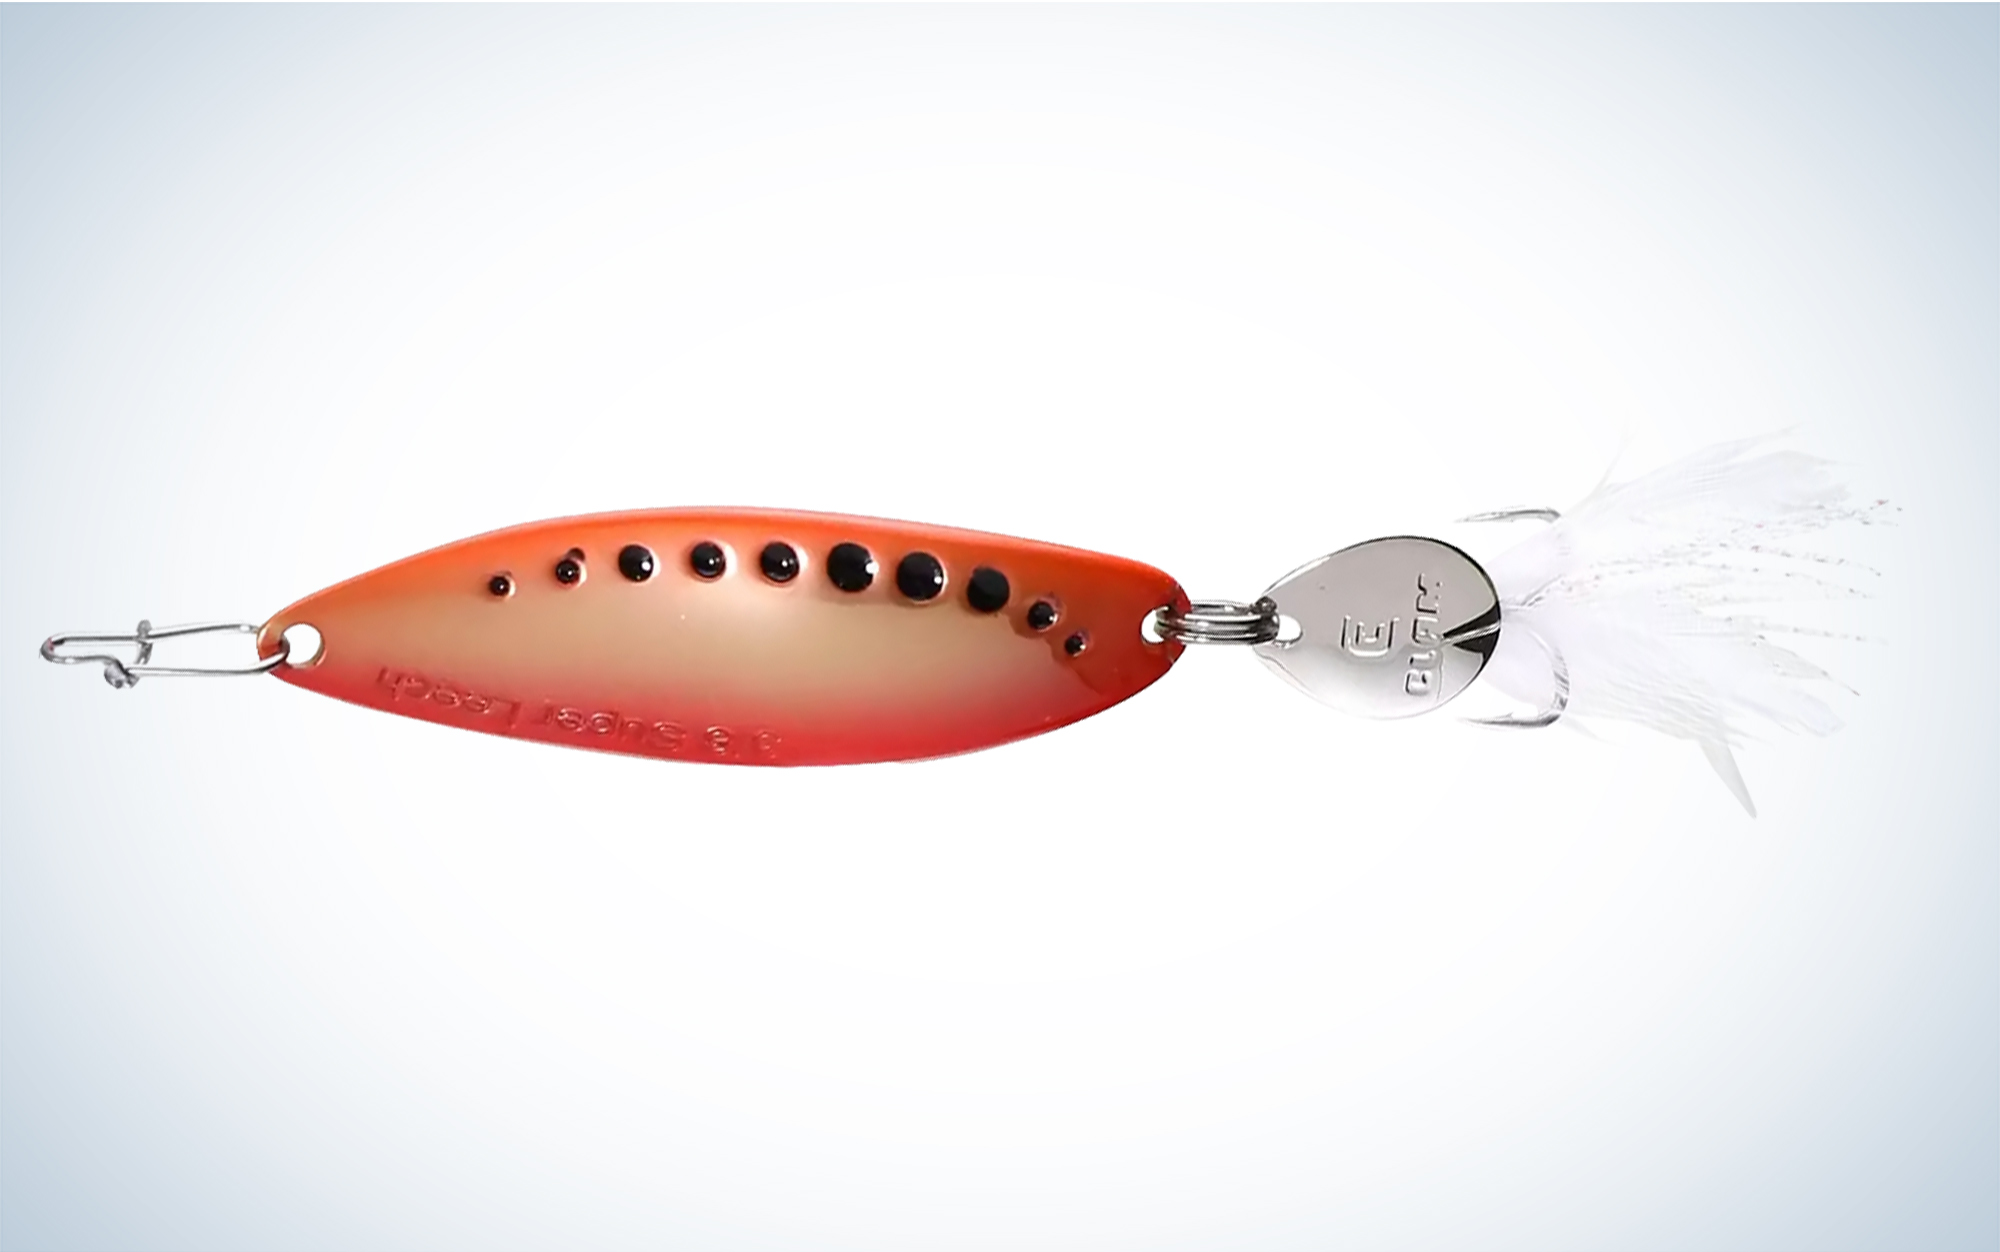 The Clam Leech Flutter Spoon is one of the best walleye ice fishing lures out there.